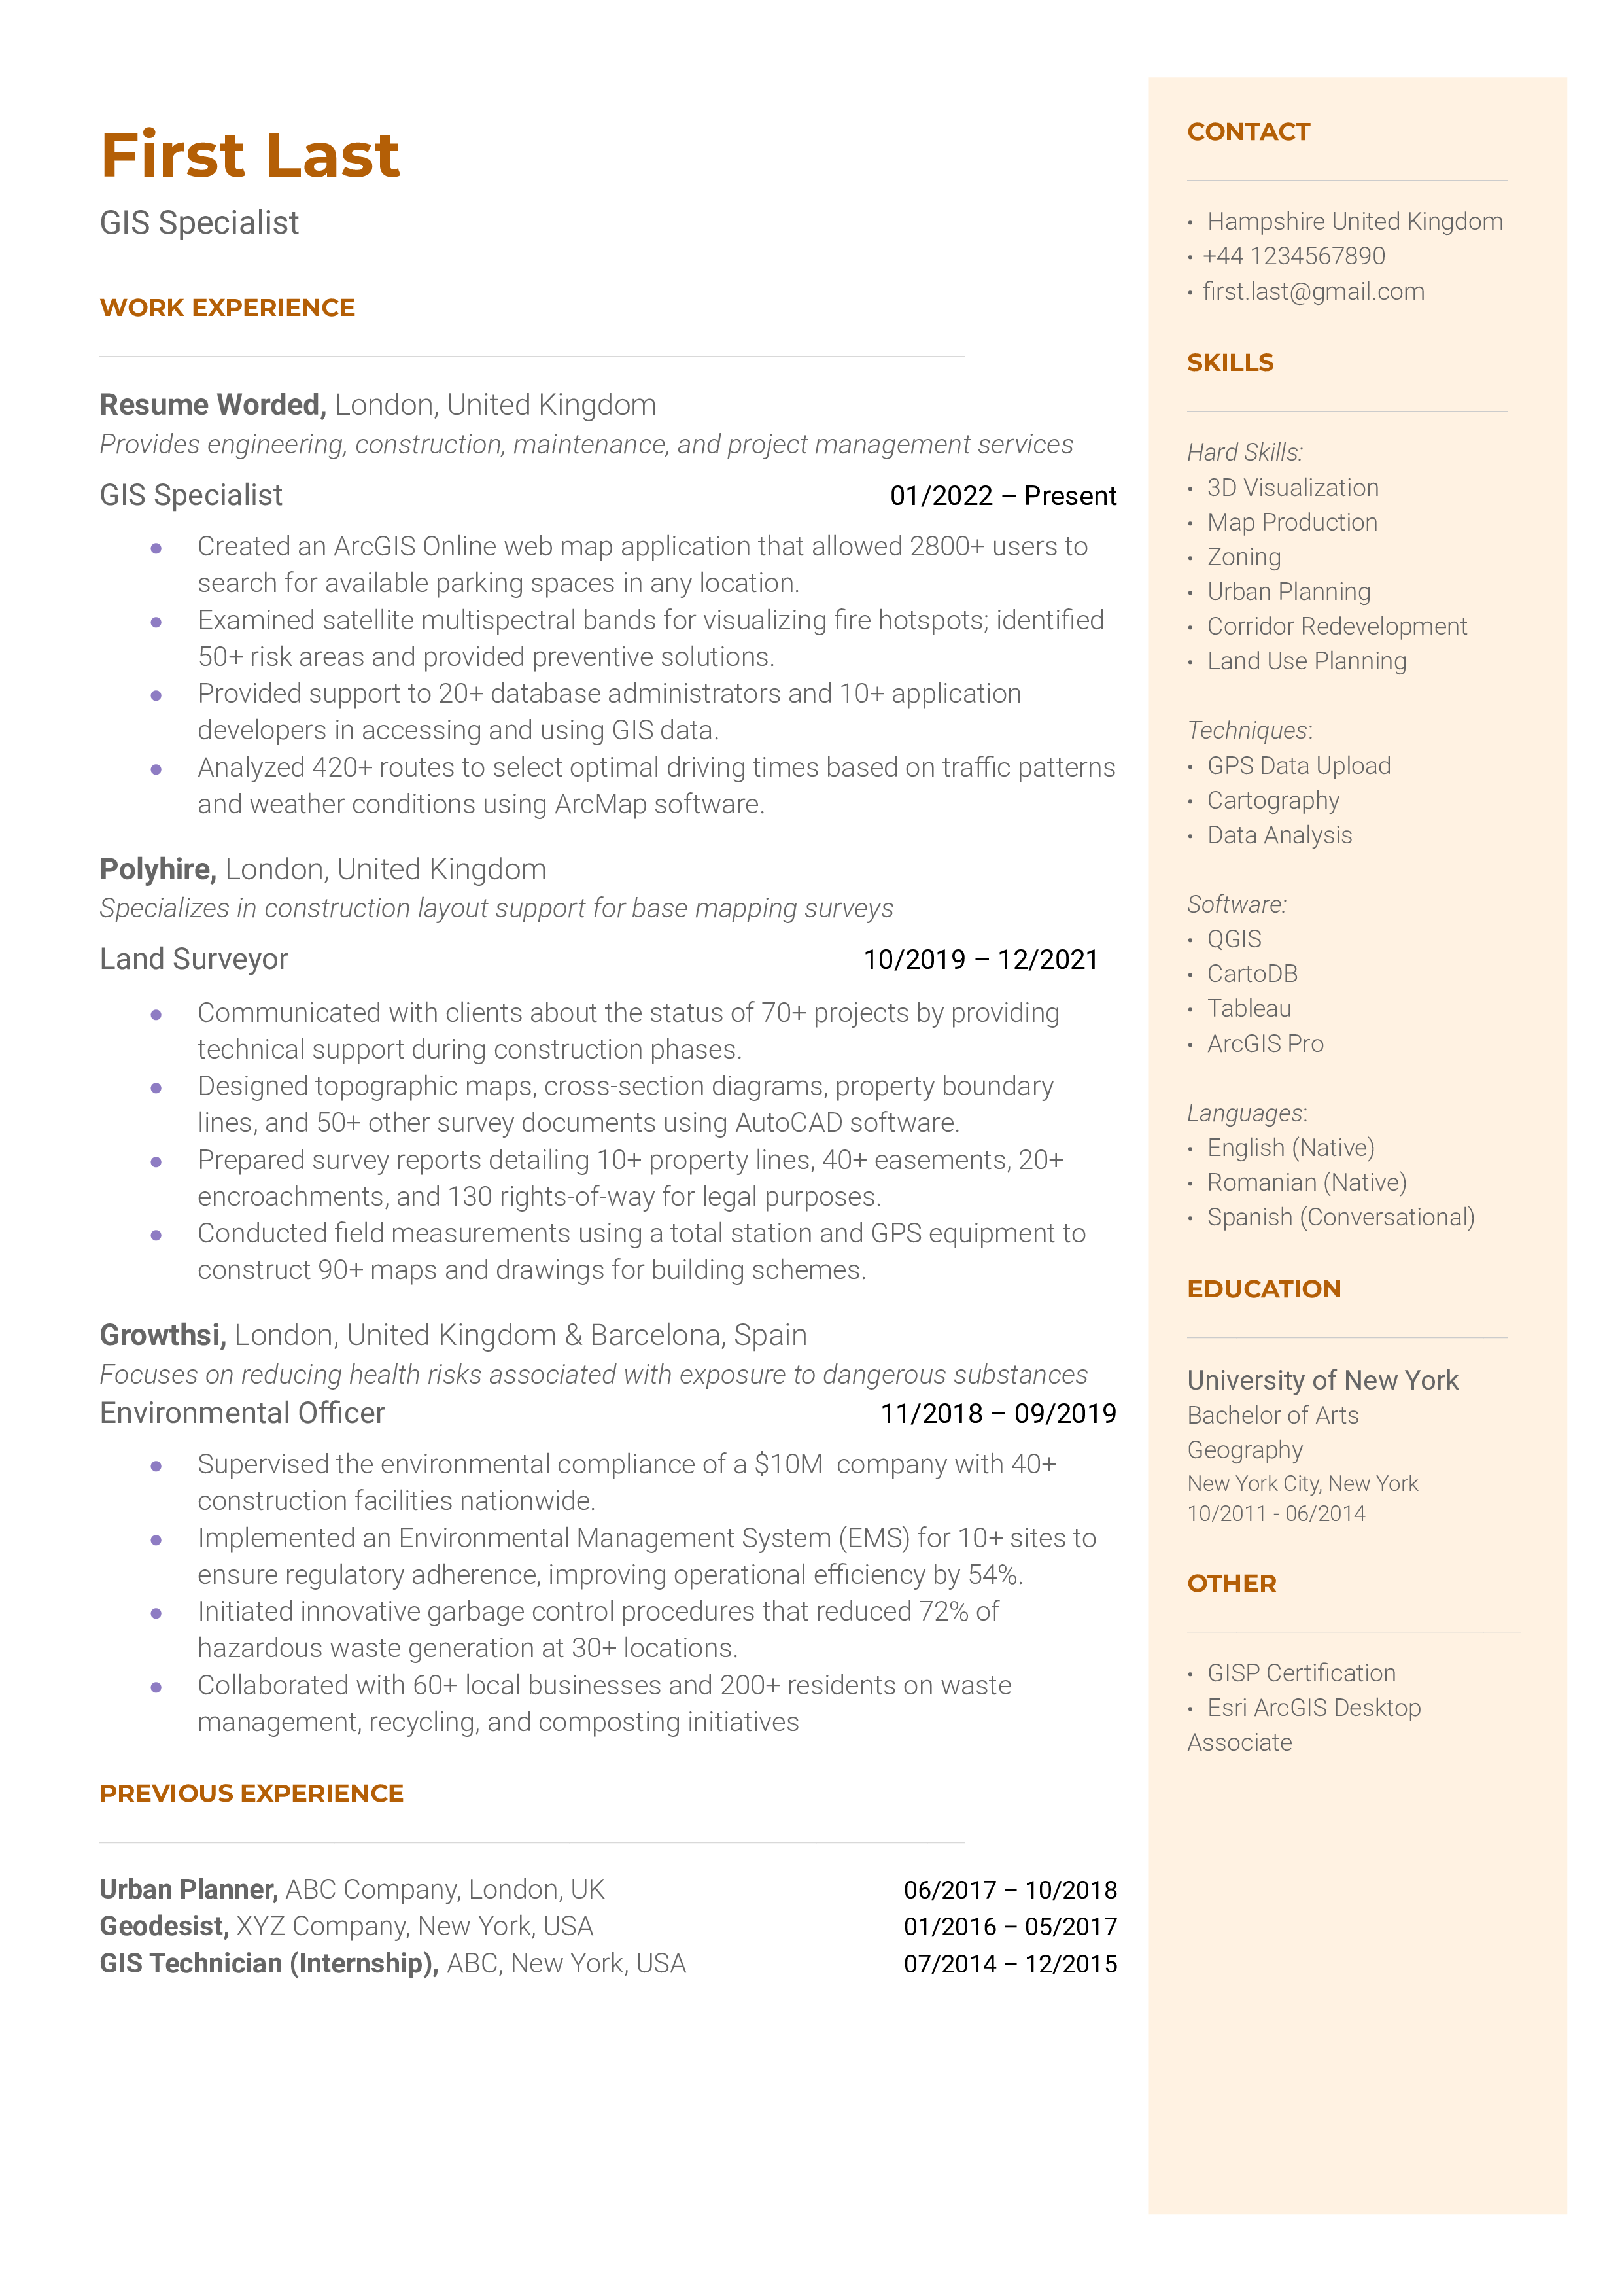 A well-structured CV of a GIS Specialist showcasing their diverse skills and project accomplishments.